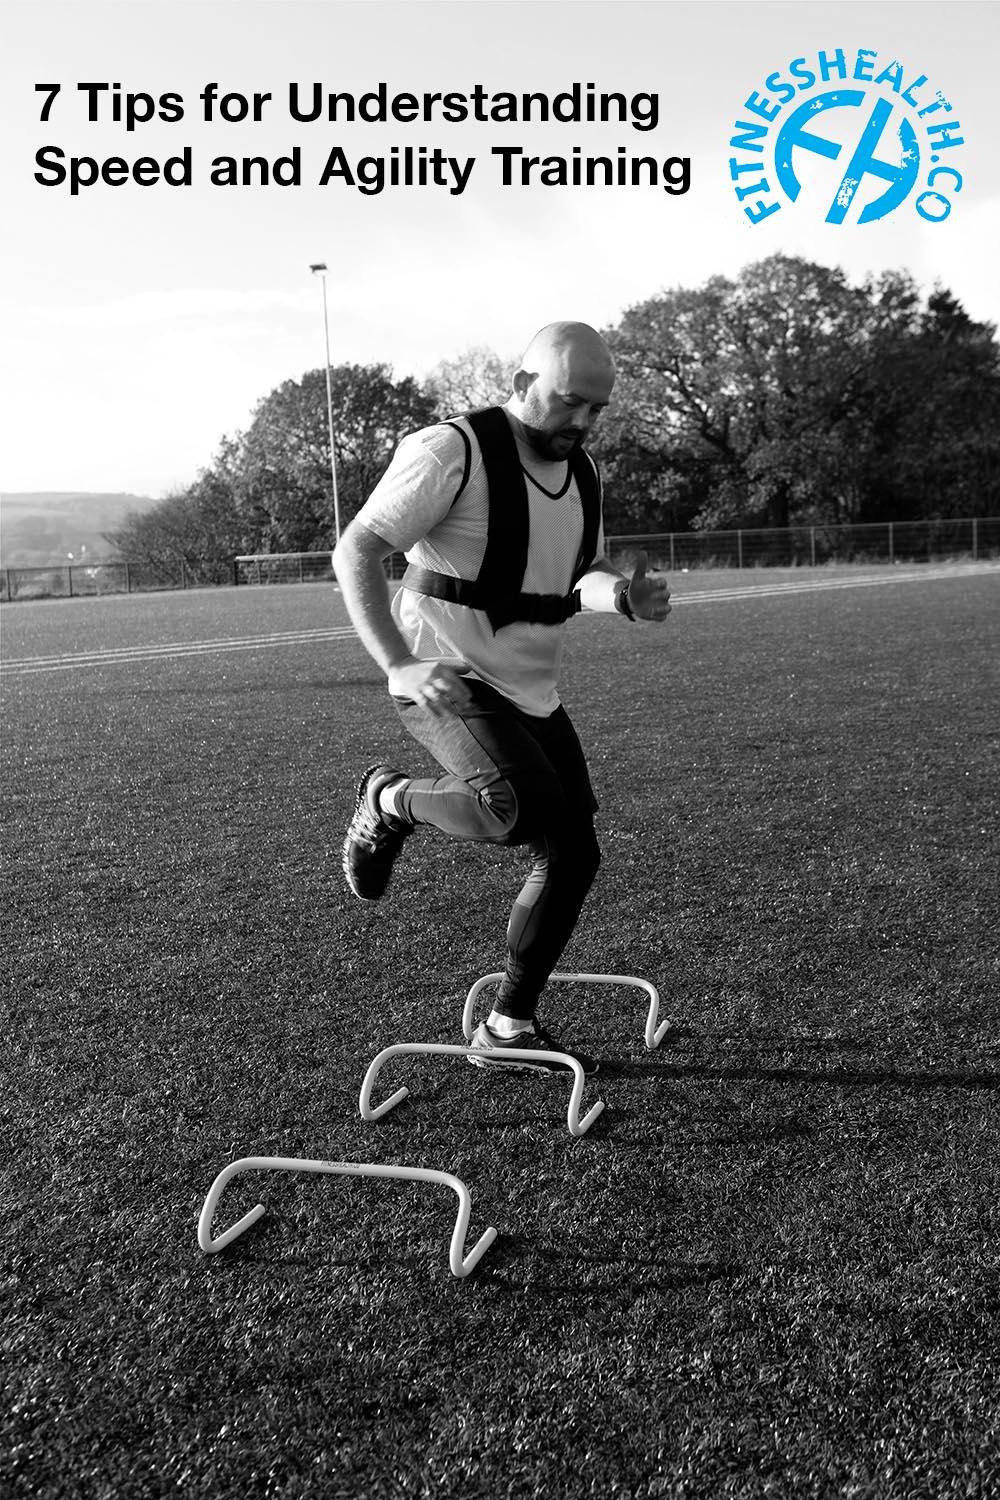 7 Tips for Understanding Speed and Agility Training - Fitness Health 